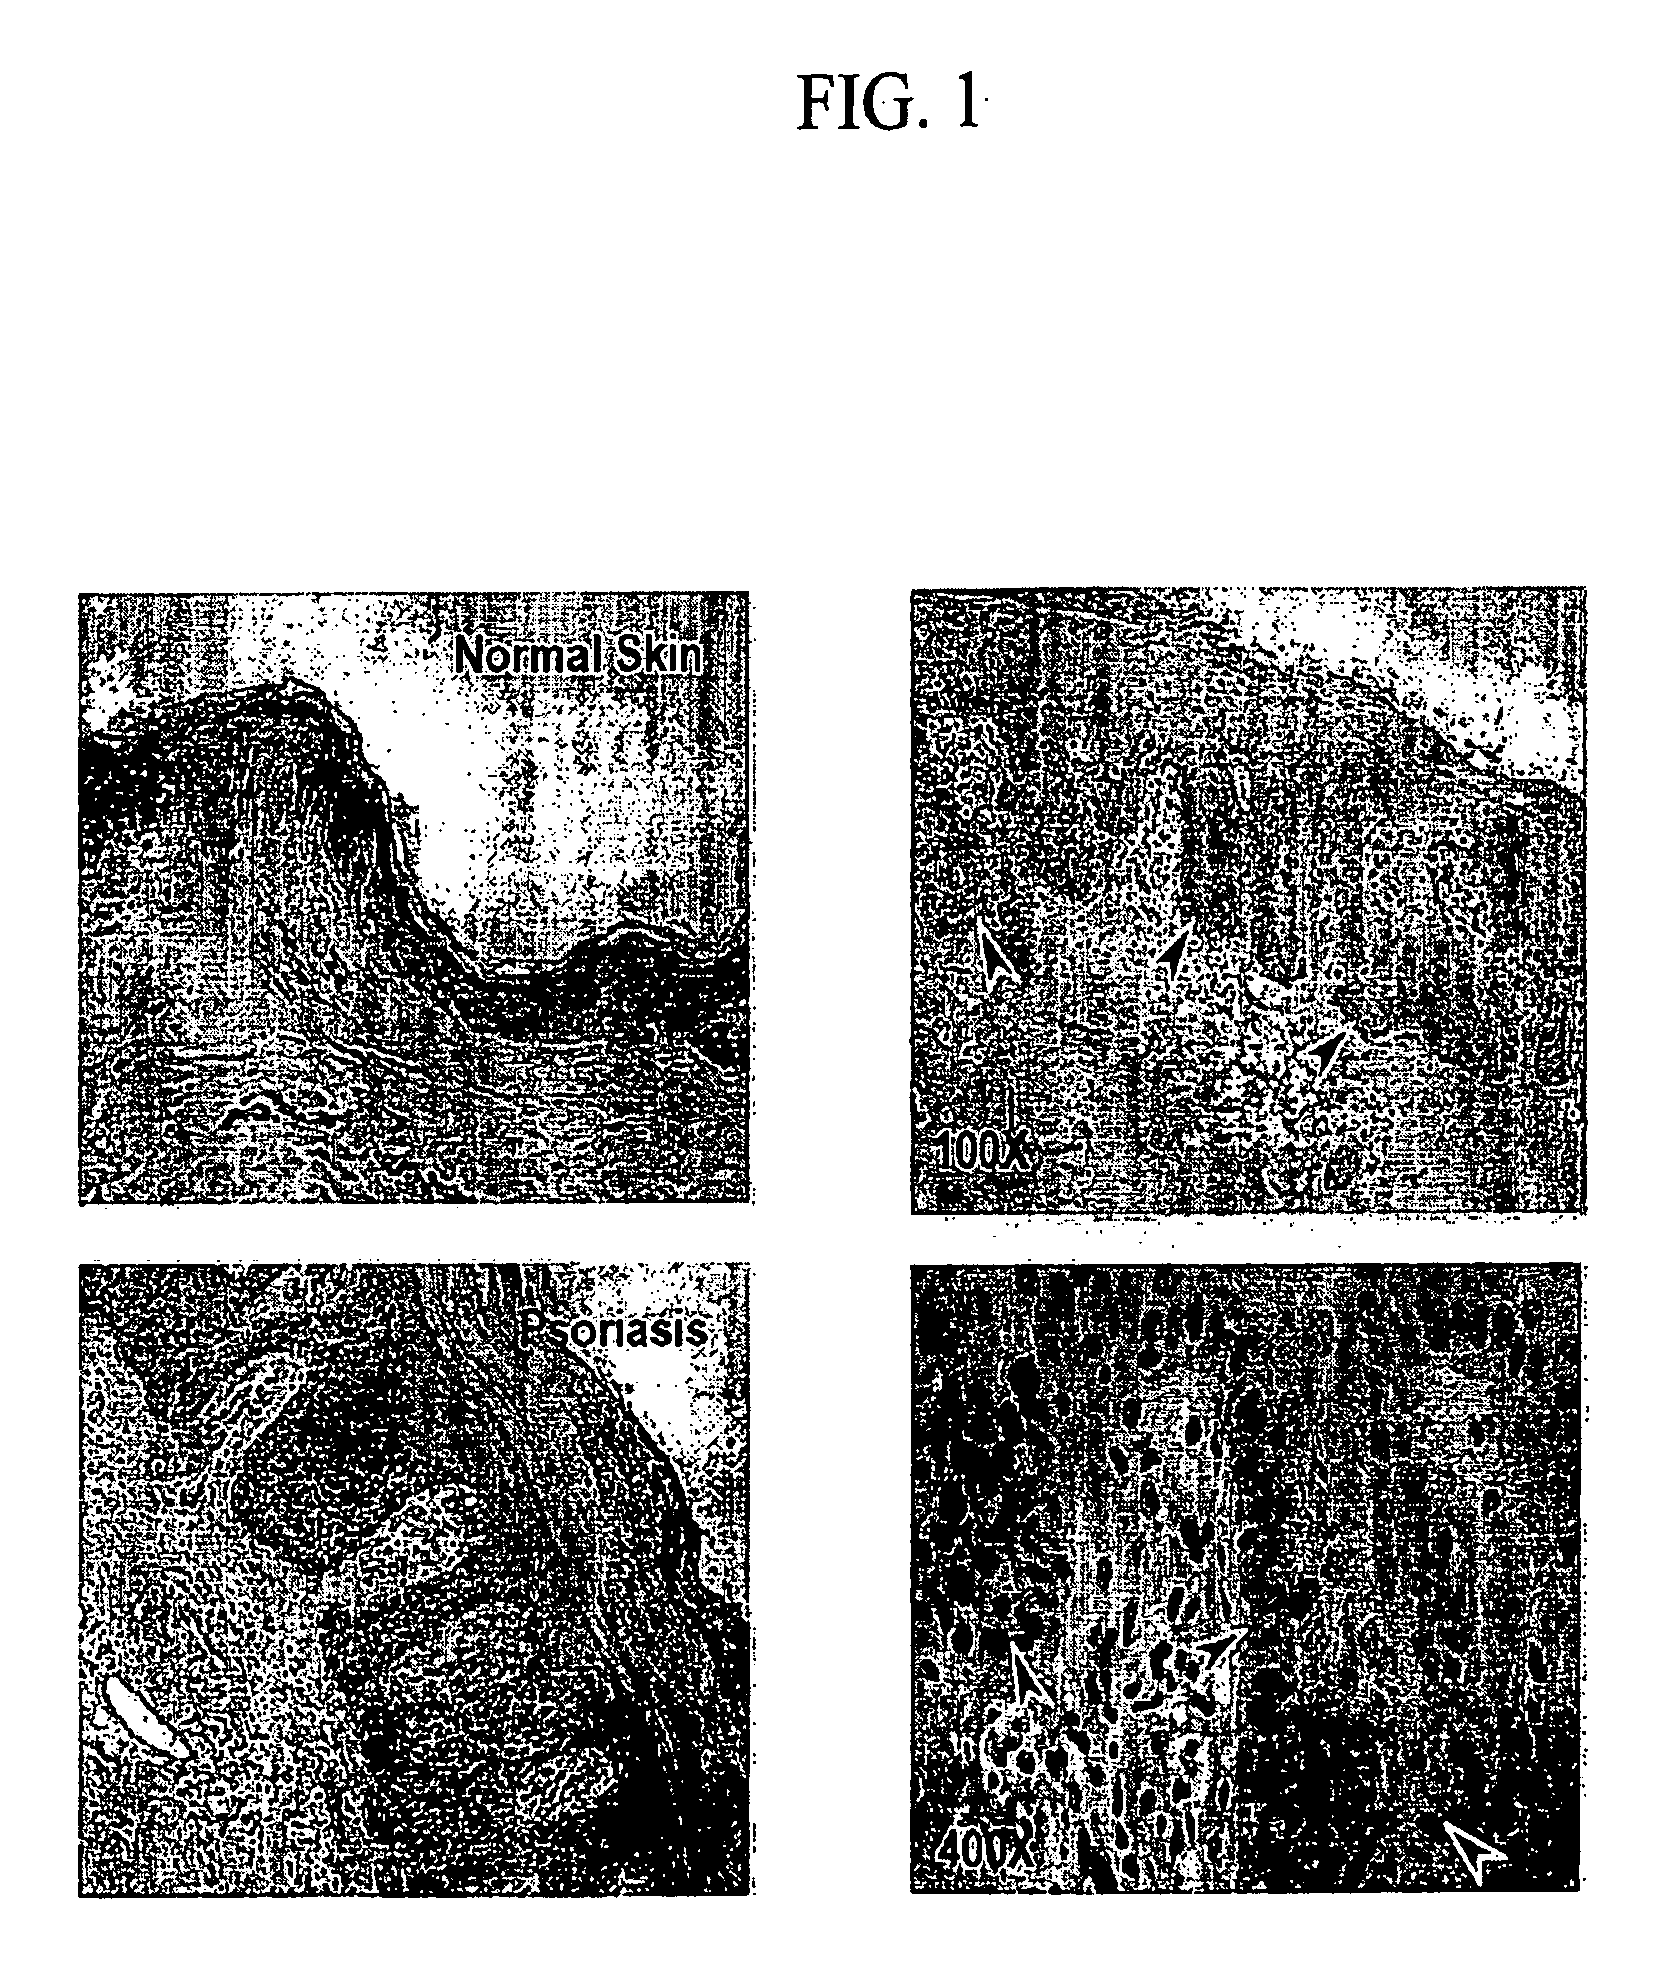 Method for detecting and treating skin disorders